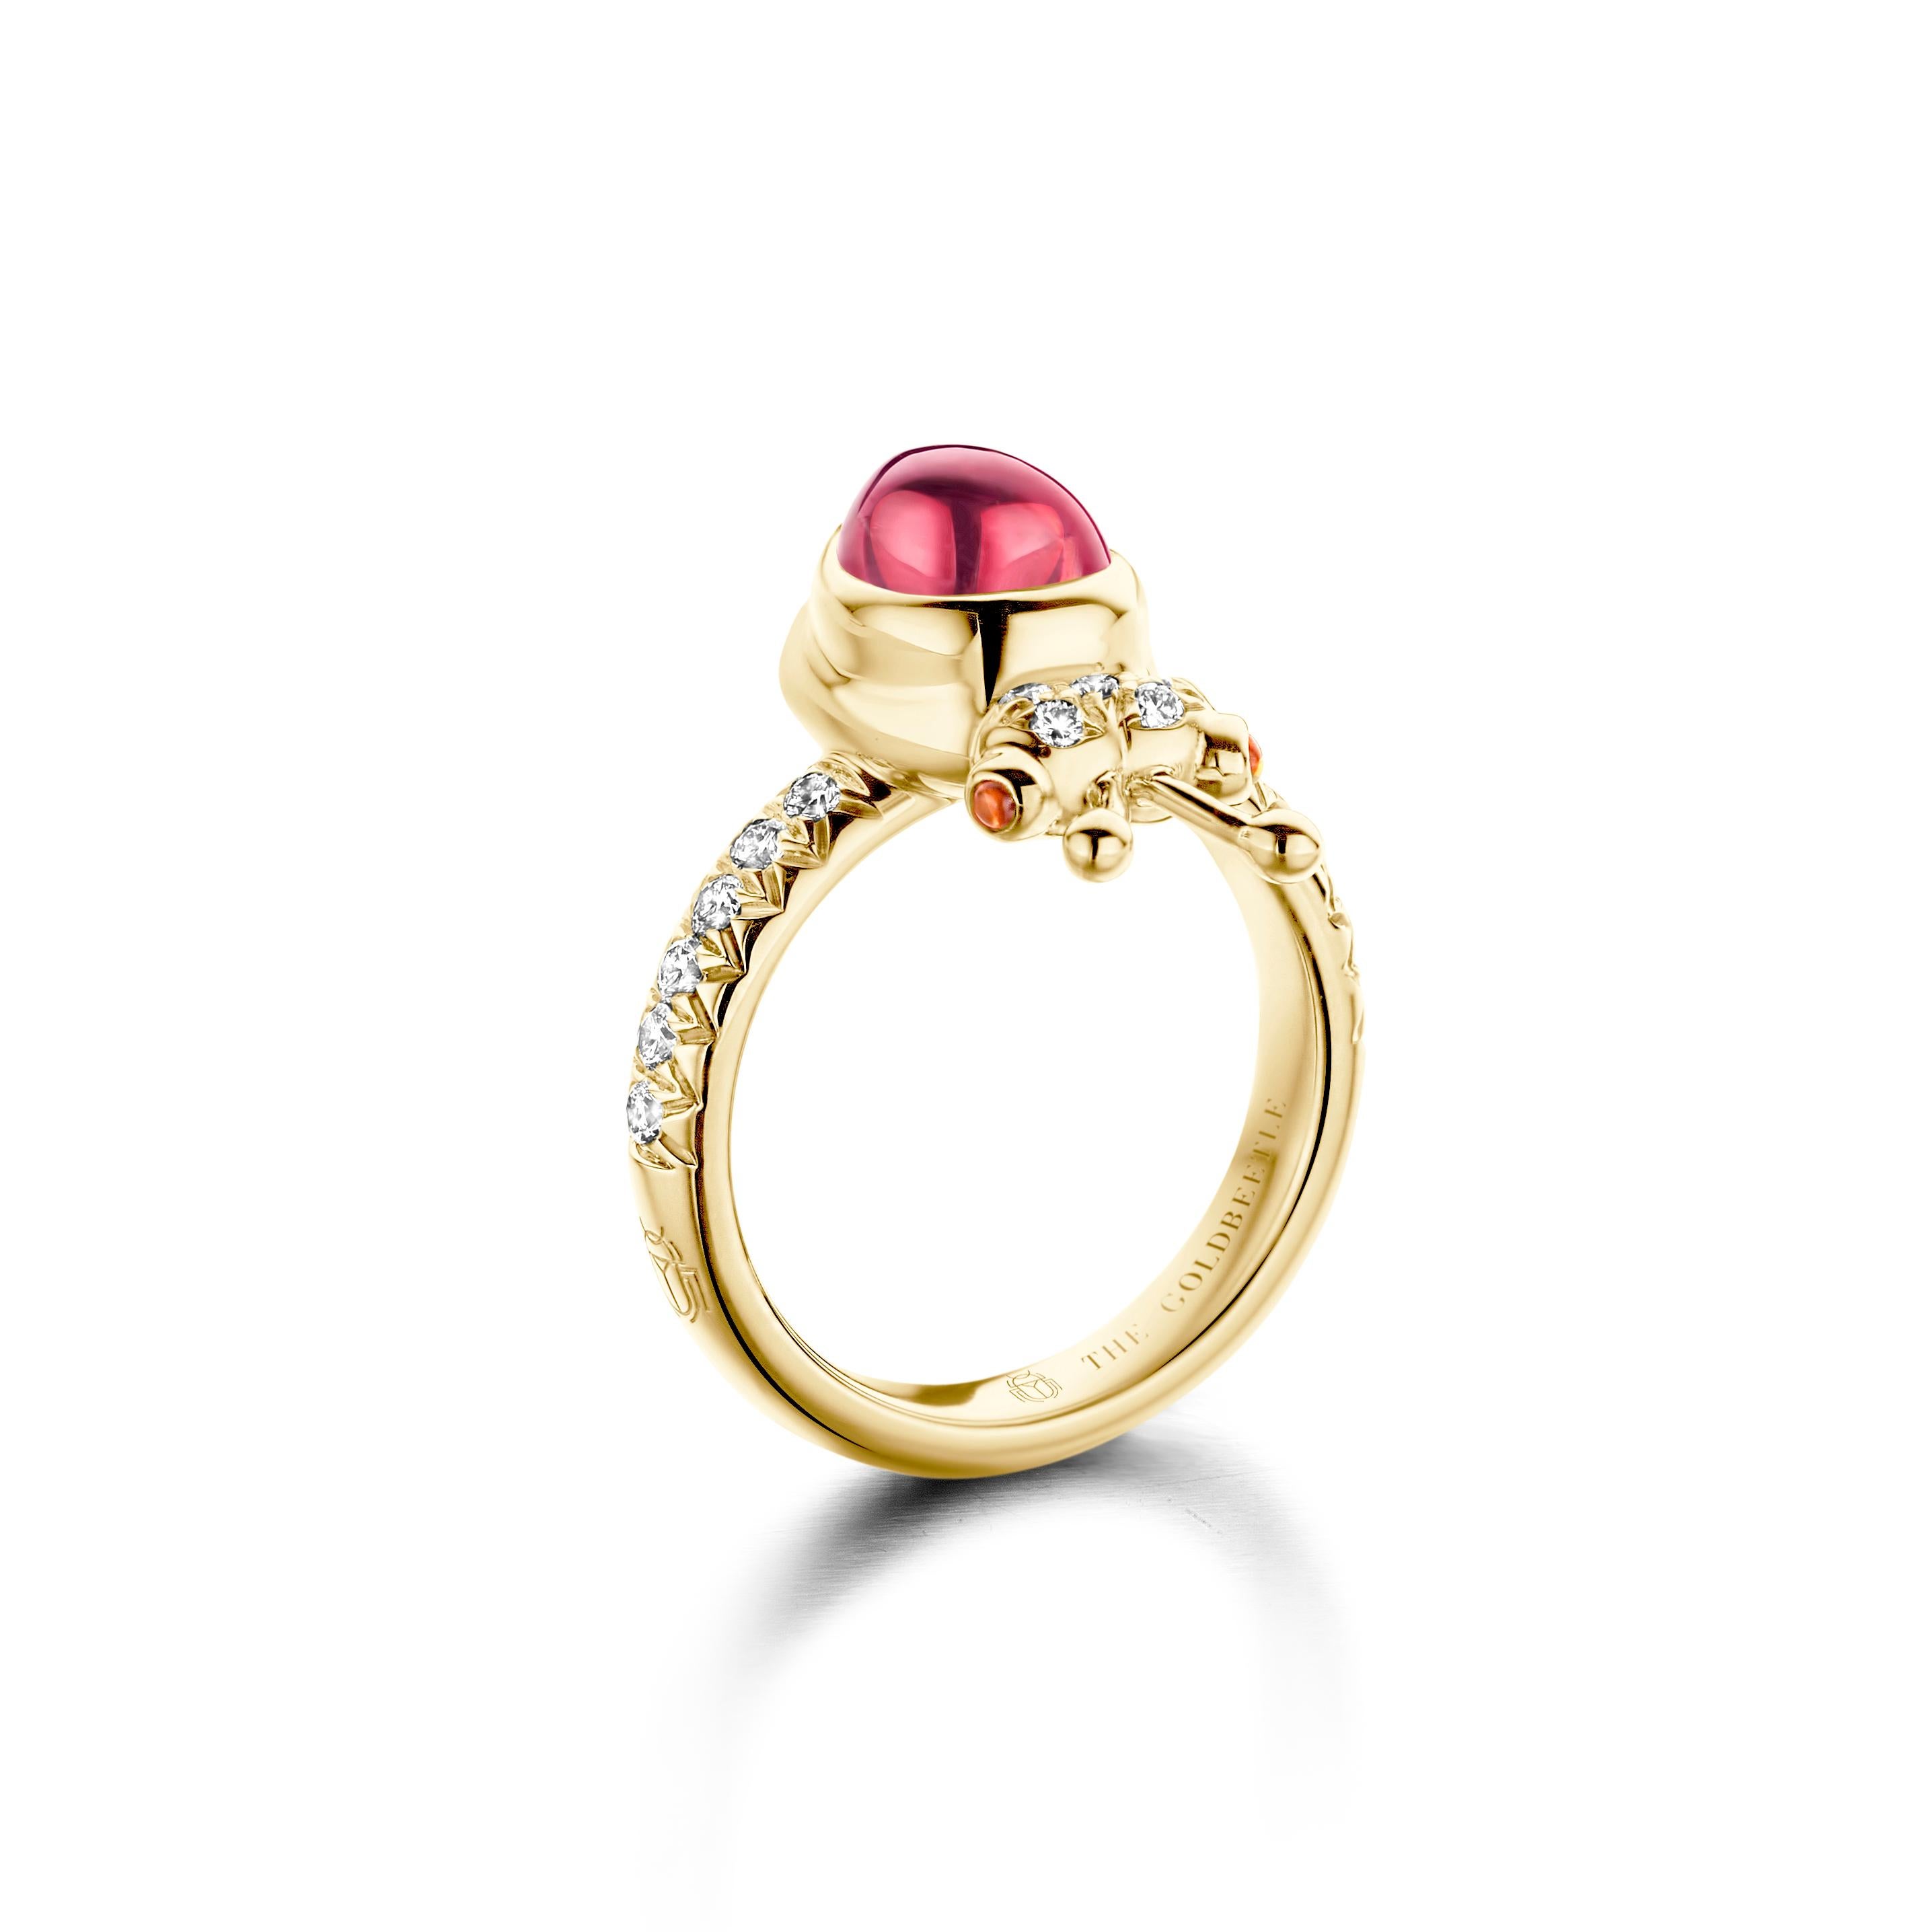 One-of-a-kind lucky beetle ring in 18-Karat yellow gold 8,6 g set with the finest diamonds in brilliant cut 0,34 Carat (VVS/DEF quality) one natural, pink tourmaline in pear cabochon cut and two green tsavorites in round cabochon cut.

Celine